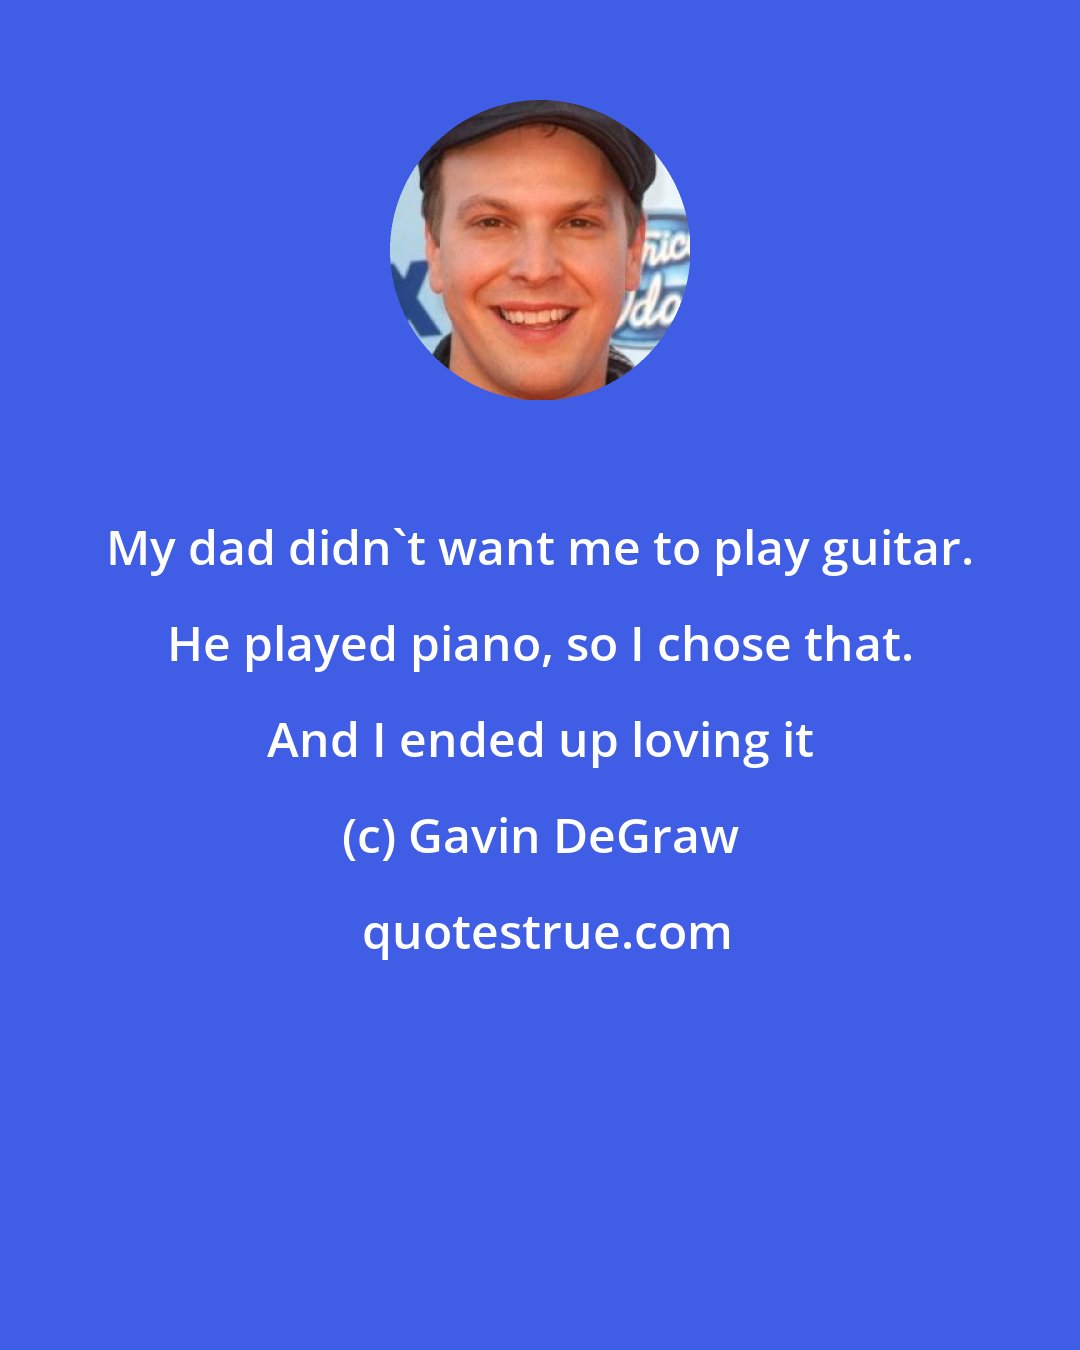 Gavin DeGraw: My dad didn't want me to play guitar. He played piano, so I chose that. And I ended up loving it